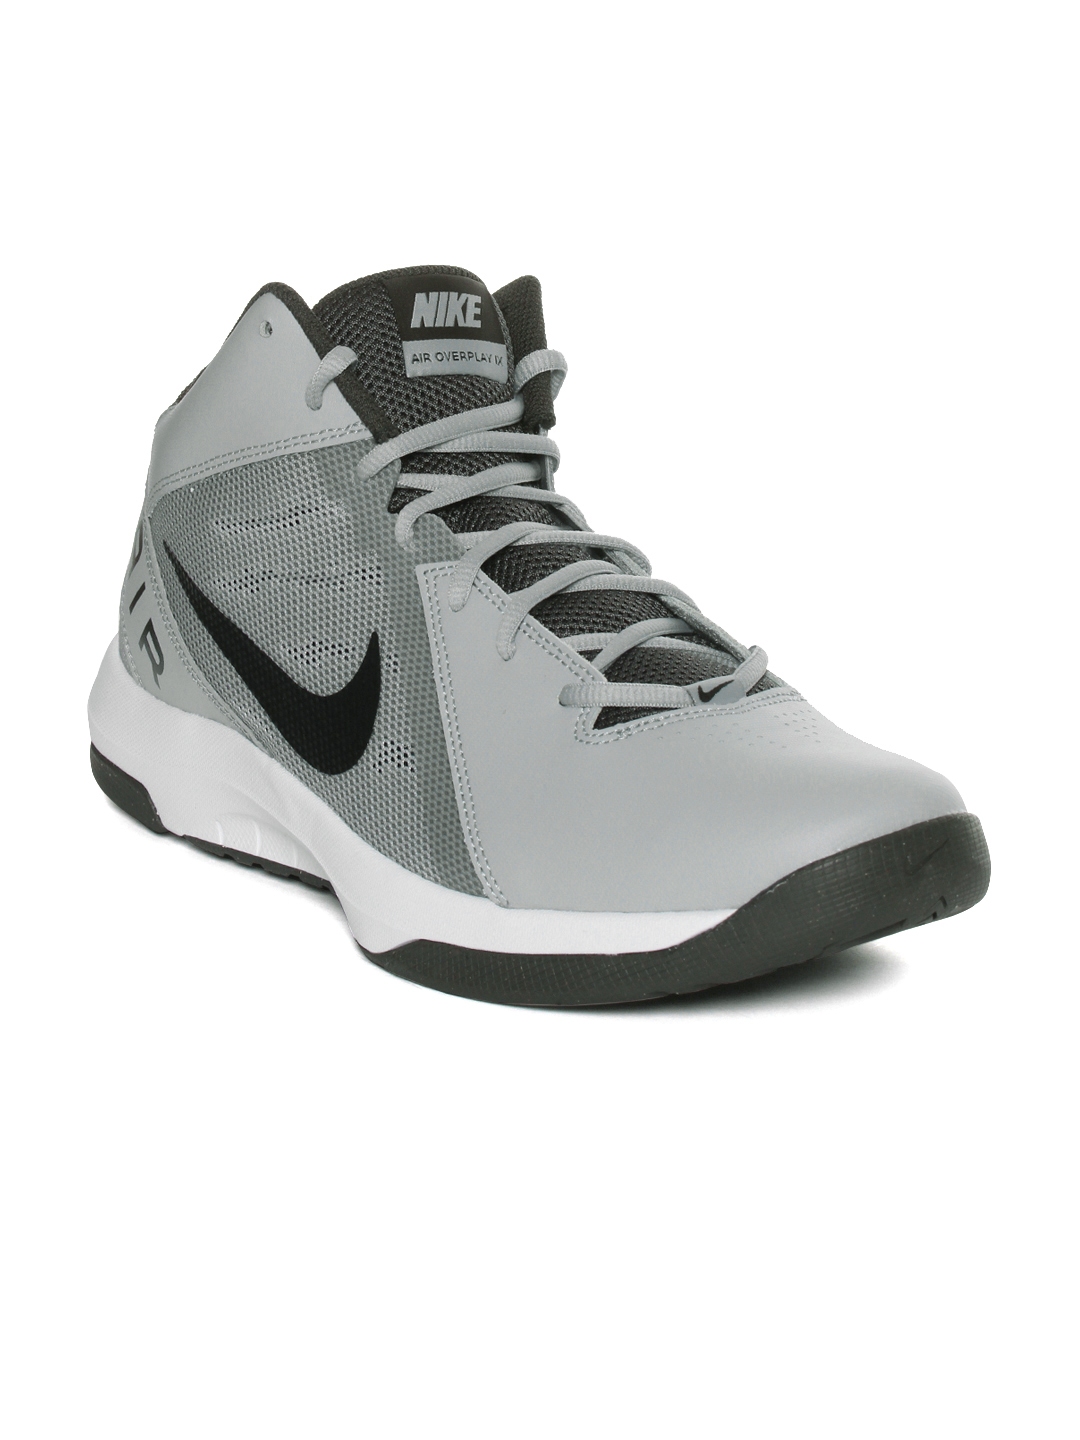 Buy Nike Men White & Grey The Air Overplay IX Basketball Shoes - Sports ...